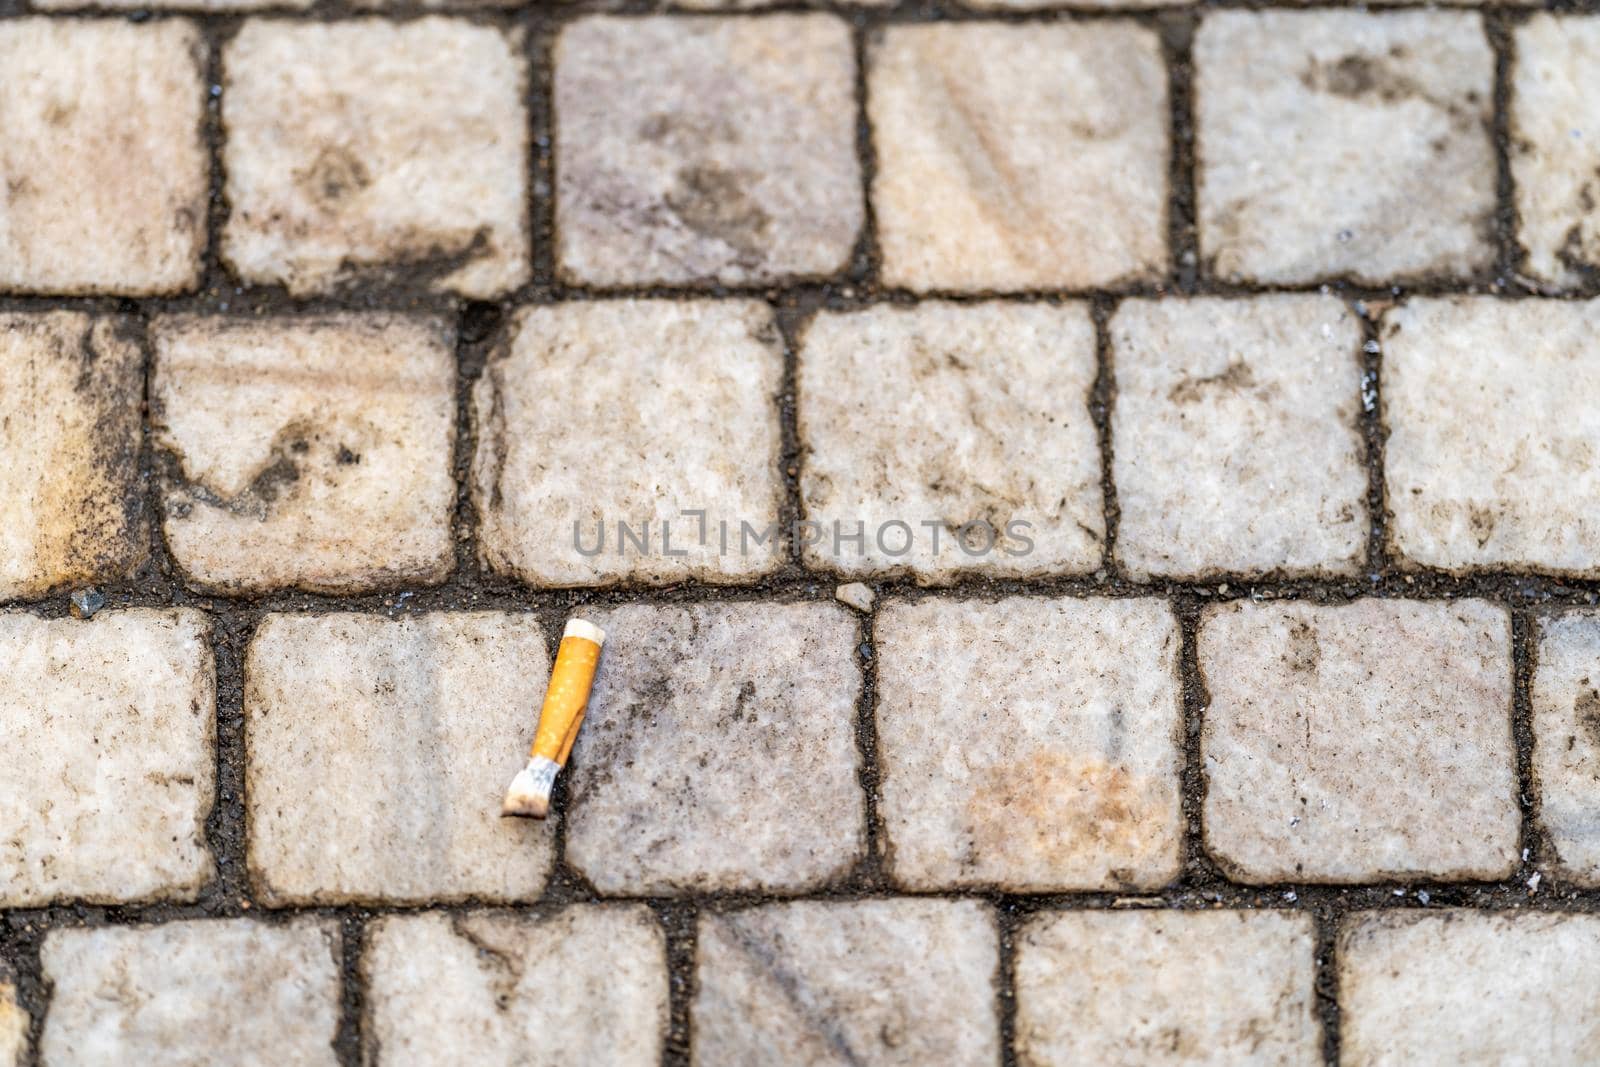 cigarette butt on the sidewalk in the city.